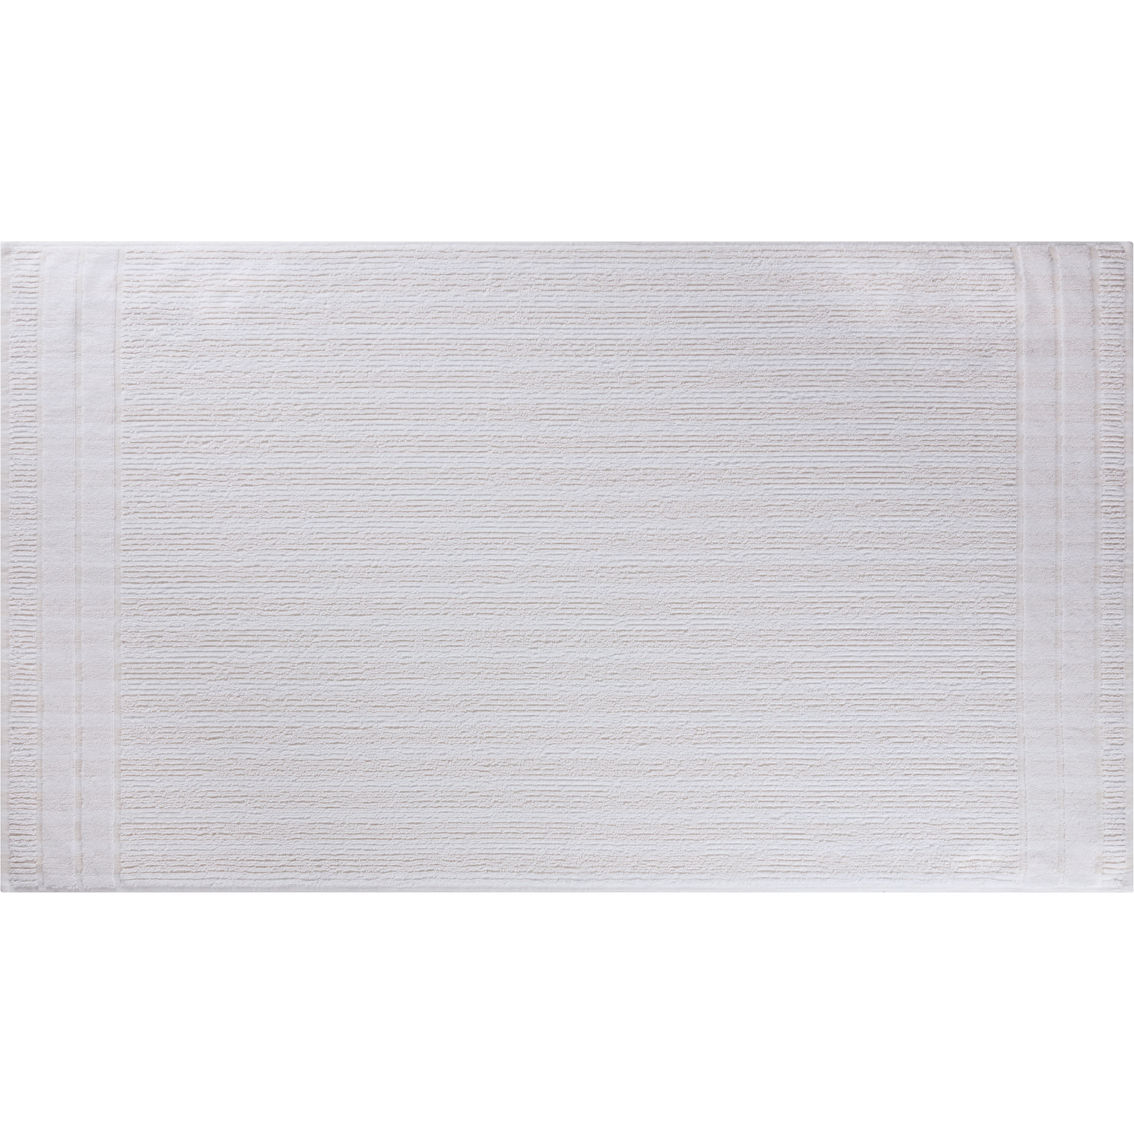 Martex Fresh and Collected Stella Bath Towel - Image 2 of 3